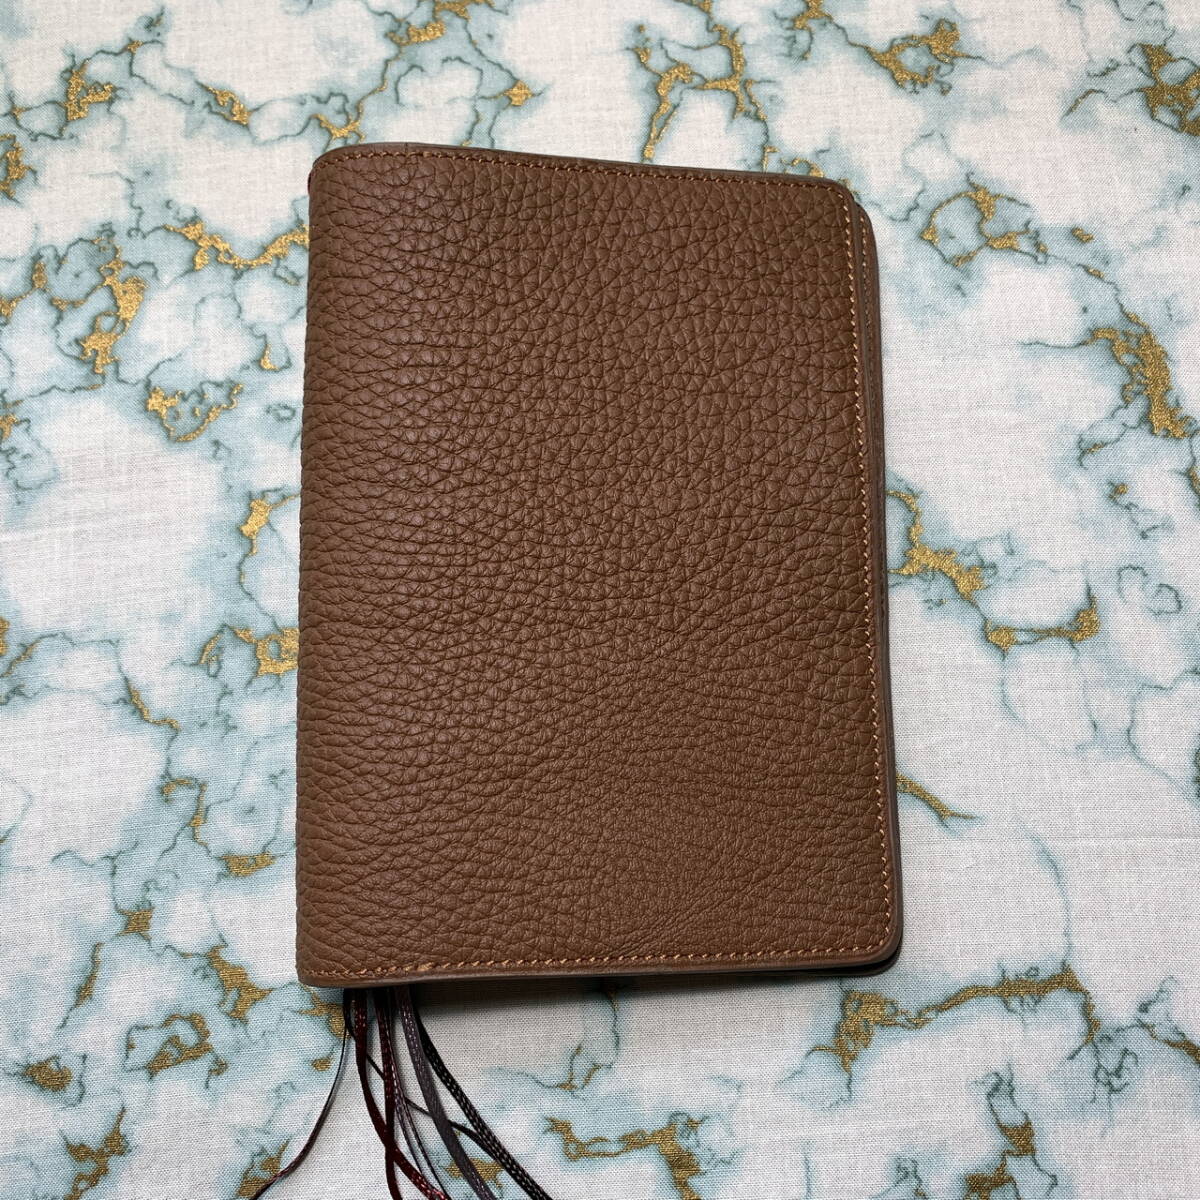  French leather south . production toliyon leather (aru The n) firebird book cover ( library book@ size ) [ high class specification ] hand ... is good high class leather made. 